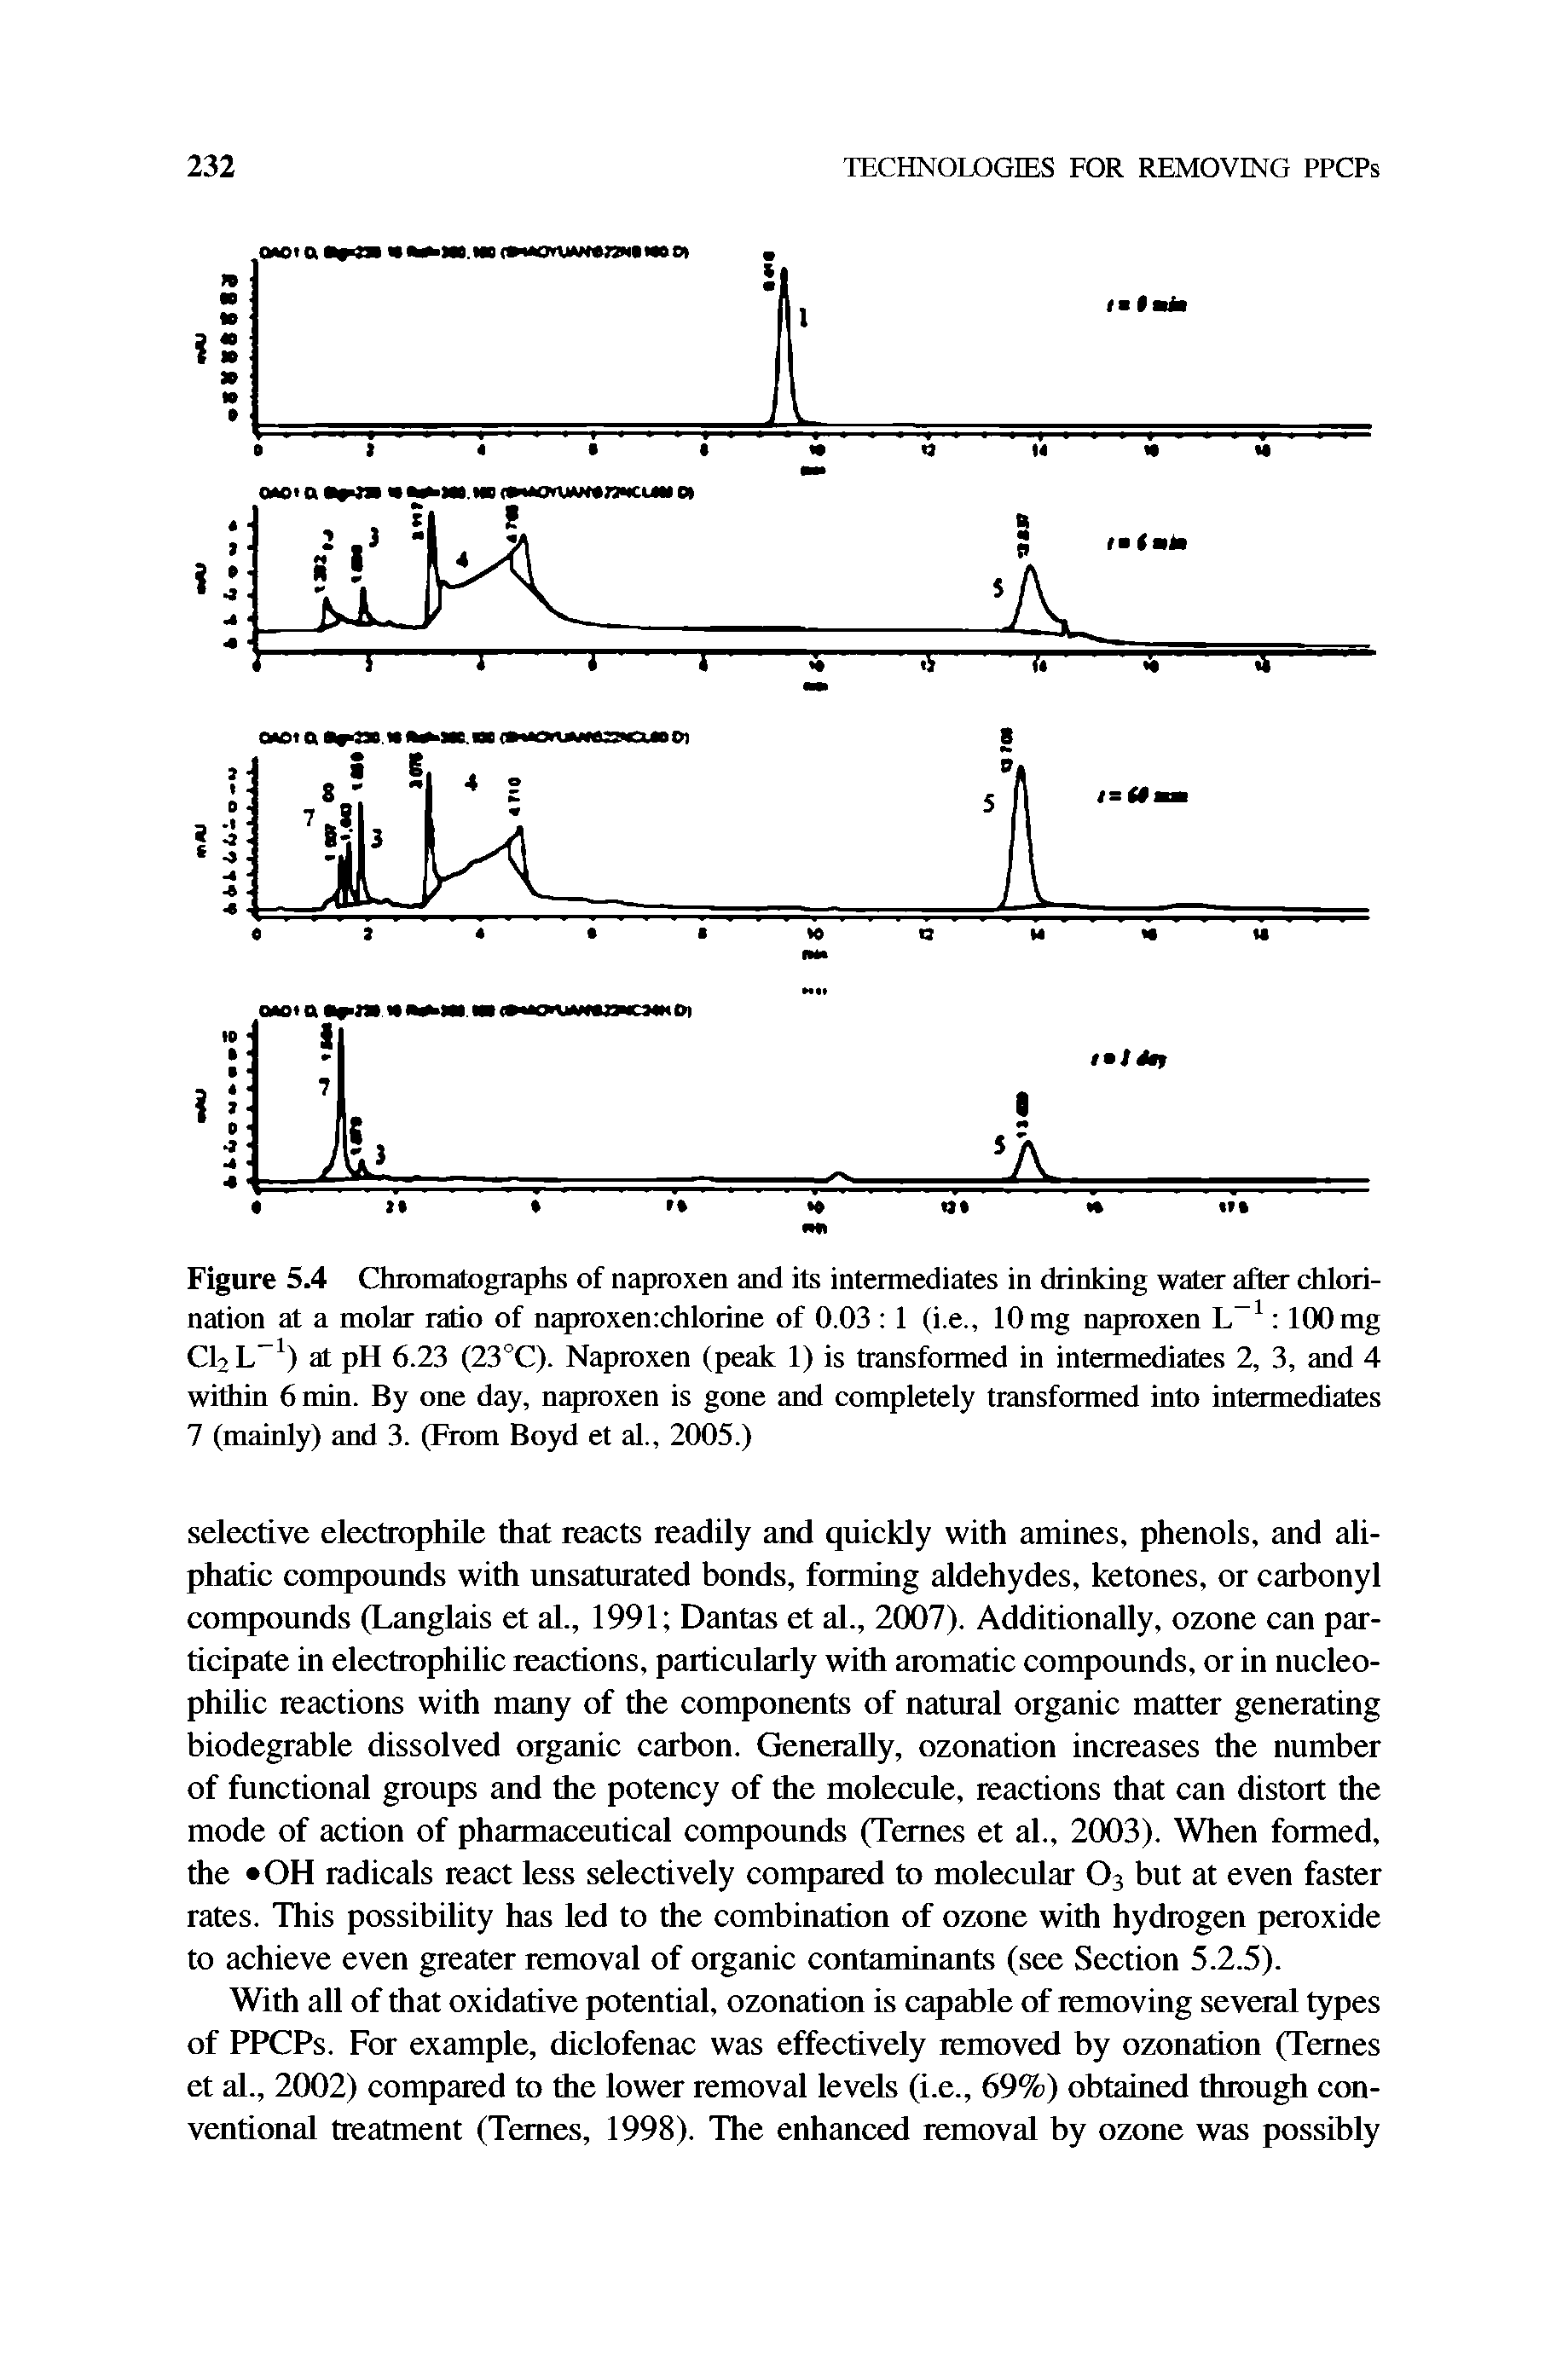 Figure 5.4 Chromatographs of naproxen and its intermediates in drinking water after chlorination at a molar ratio of naproxenxhlorine of 0.03 1 (i.e., 10 mg naproxen 100mg ClaL ) at pH 6.23 (23°C). Naproxen (peak 1) is transformed in intermediates 2, 3, and 4 within 6 min. By one day, naproxen is gone and completely transformed into intermediates 7 (mainly) and 3. (From Boyd et al., 2005.)...